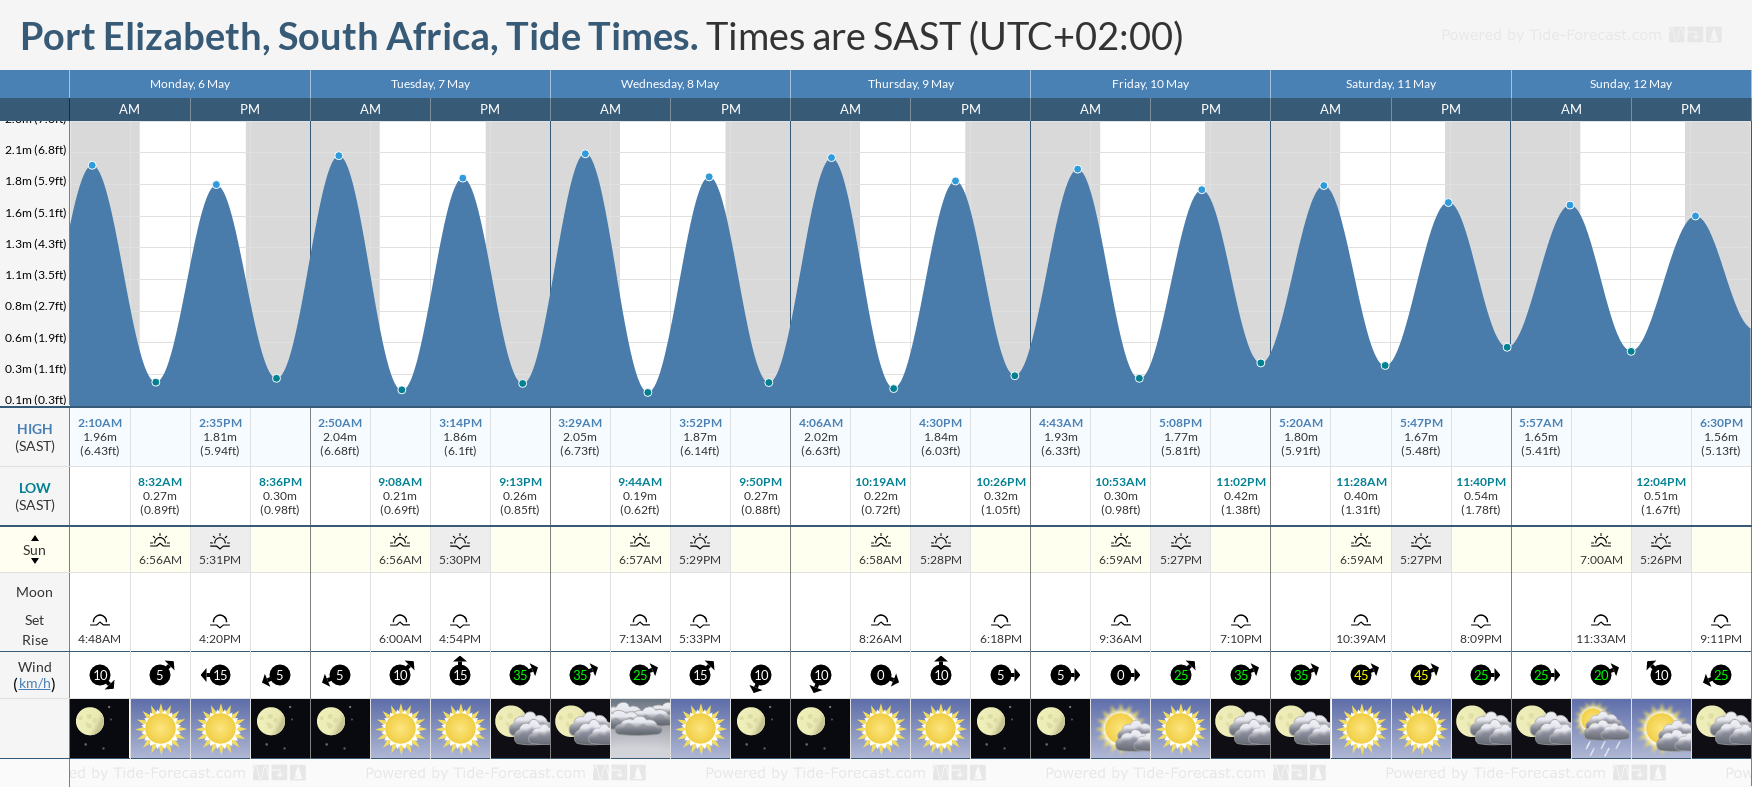 Port Elizabeth, South Africa Tide Chart including high and low tide tide times for the next 7 days